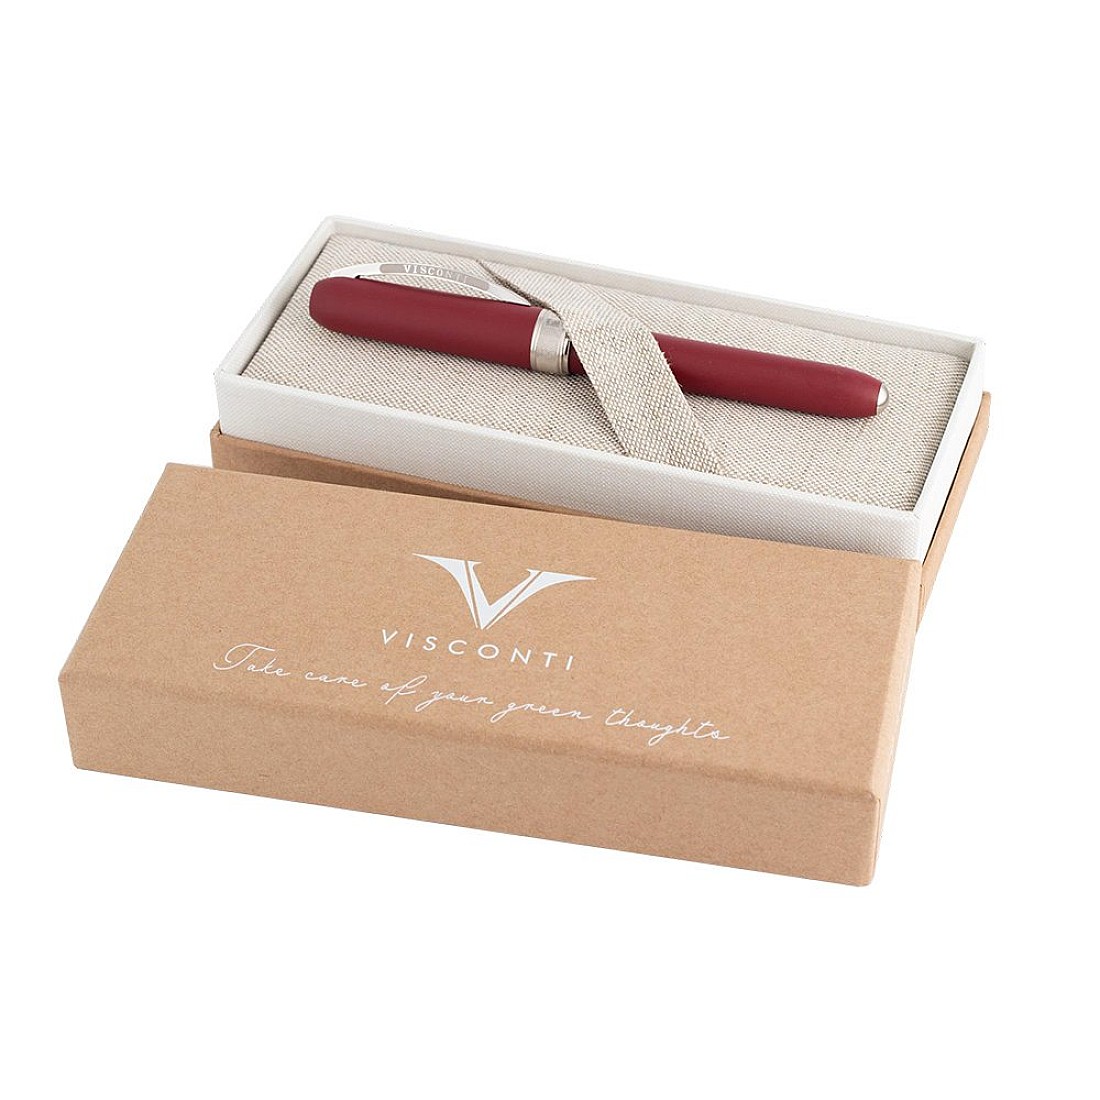 Visconti Eco Logic Red Rollerball